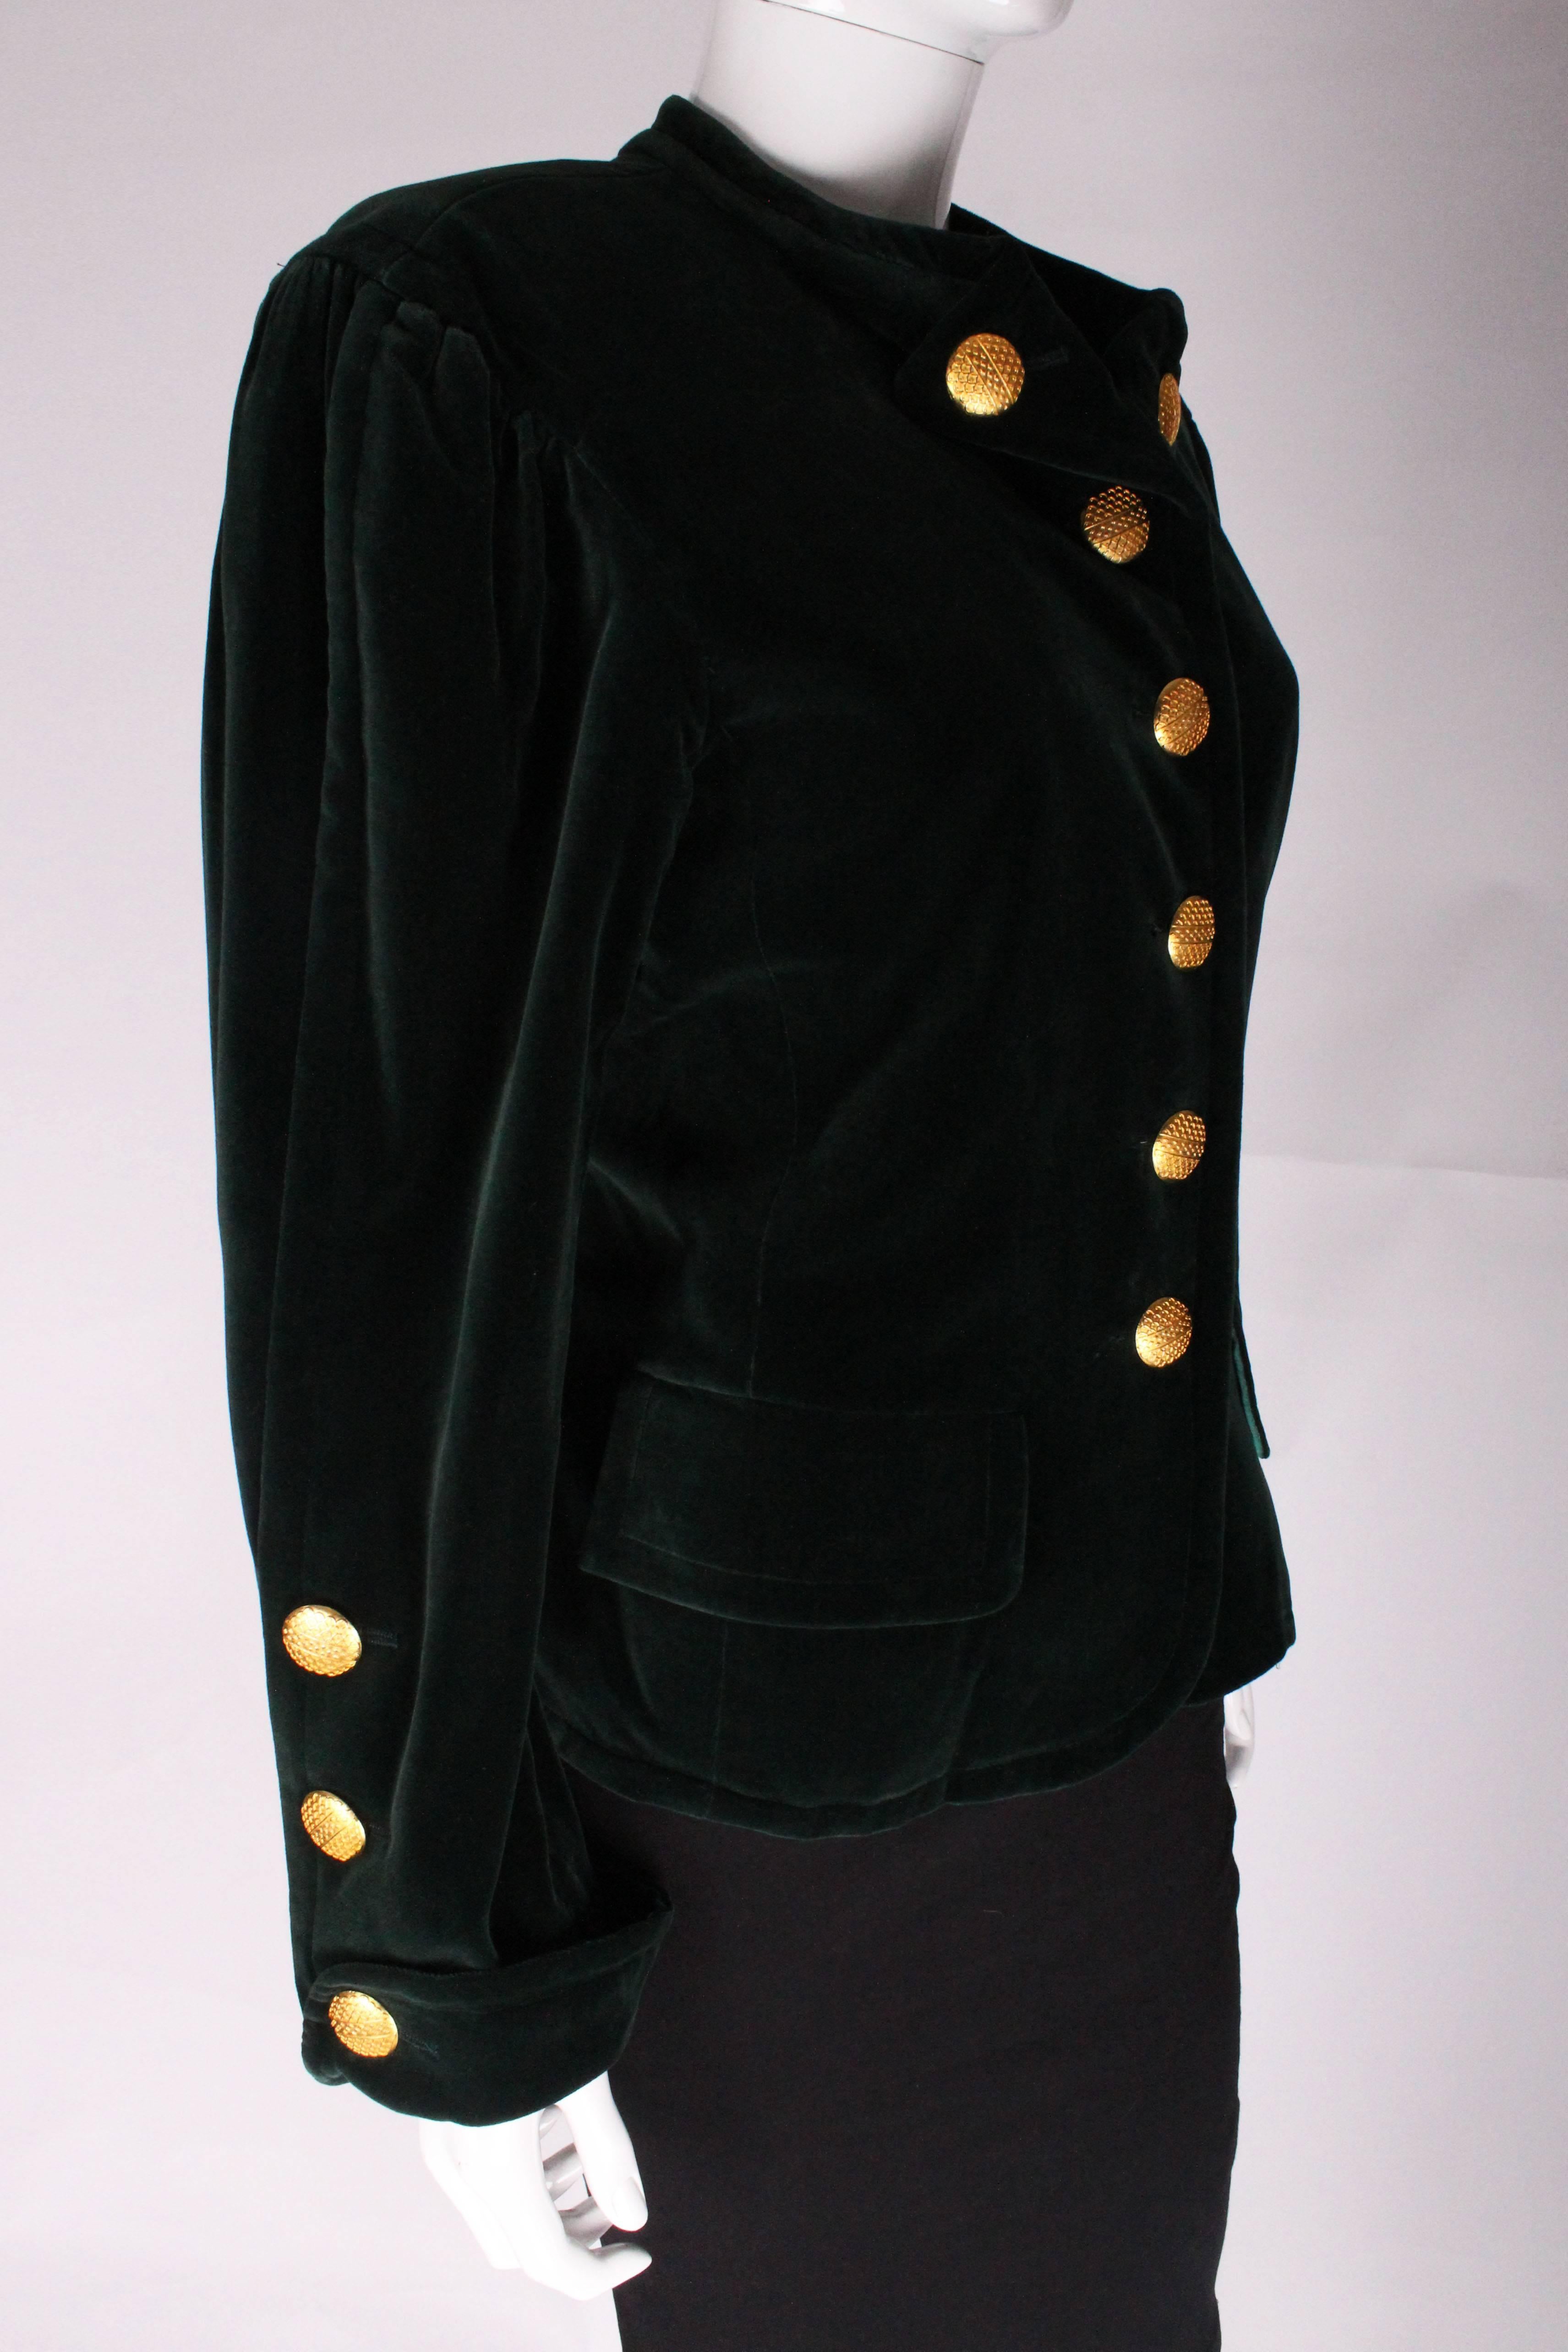 
A great jacket by Yves Saint Laurent, Rive Gauche line. In a great green velvet with crimson lining, and glorious gold buttons, this jacket is a real head turner.
The jacket has a button down collar, and  2 pockets on the front at hip leval.